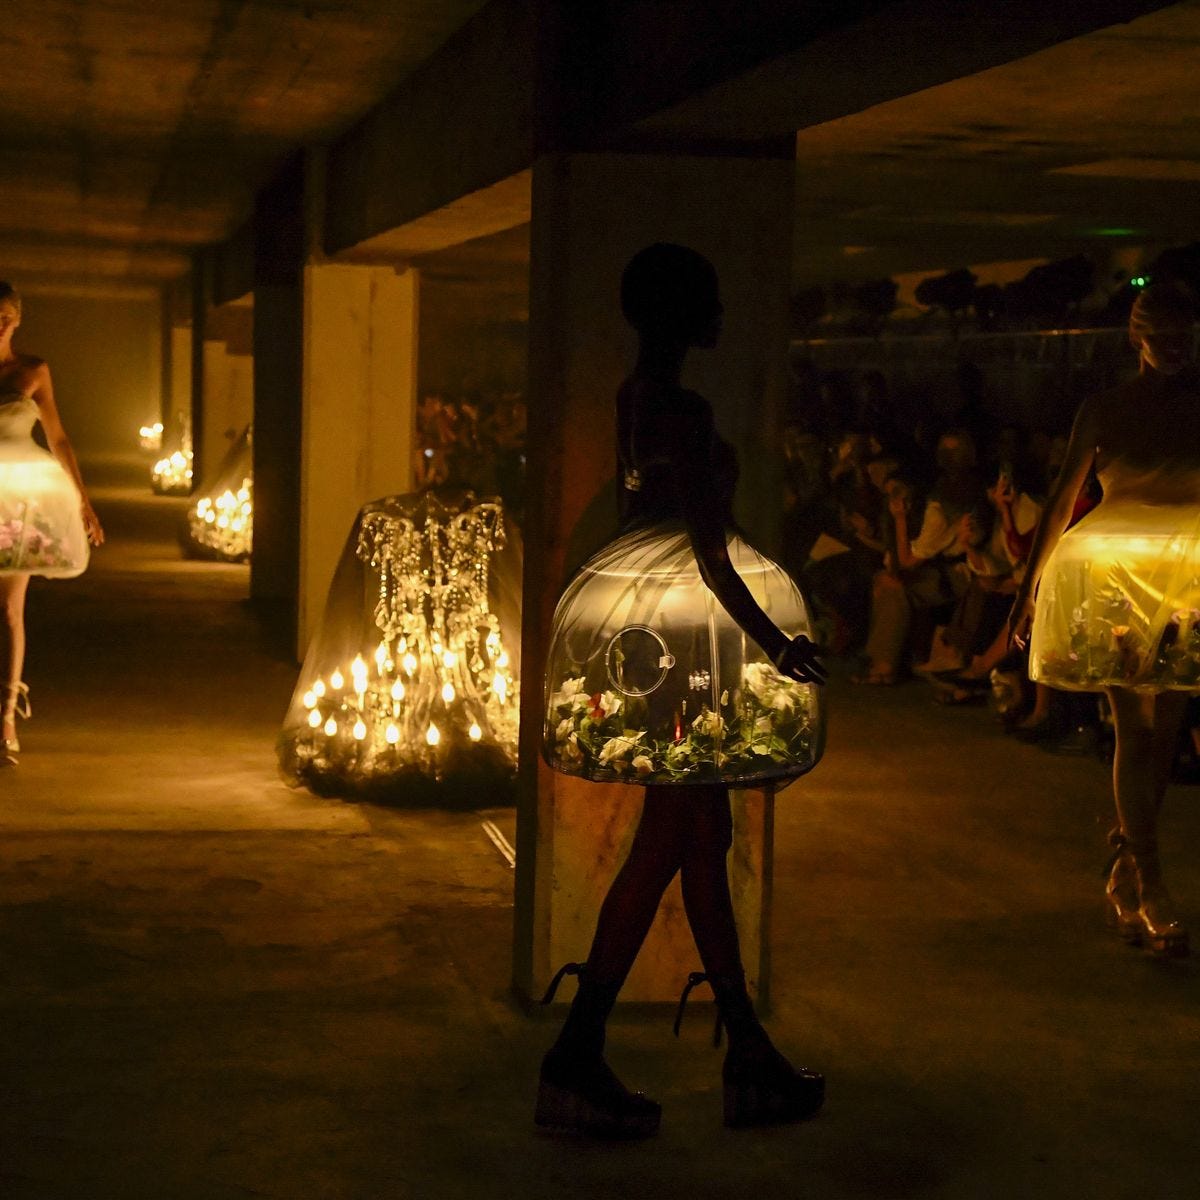 Undercover Created Terrarium Dresses With Live Butterflies